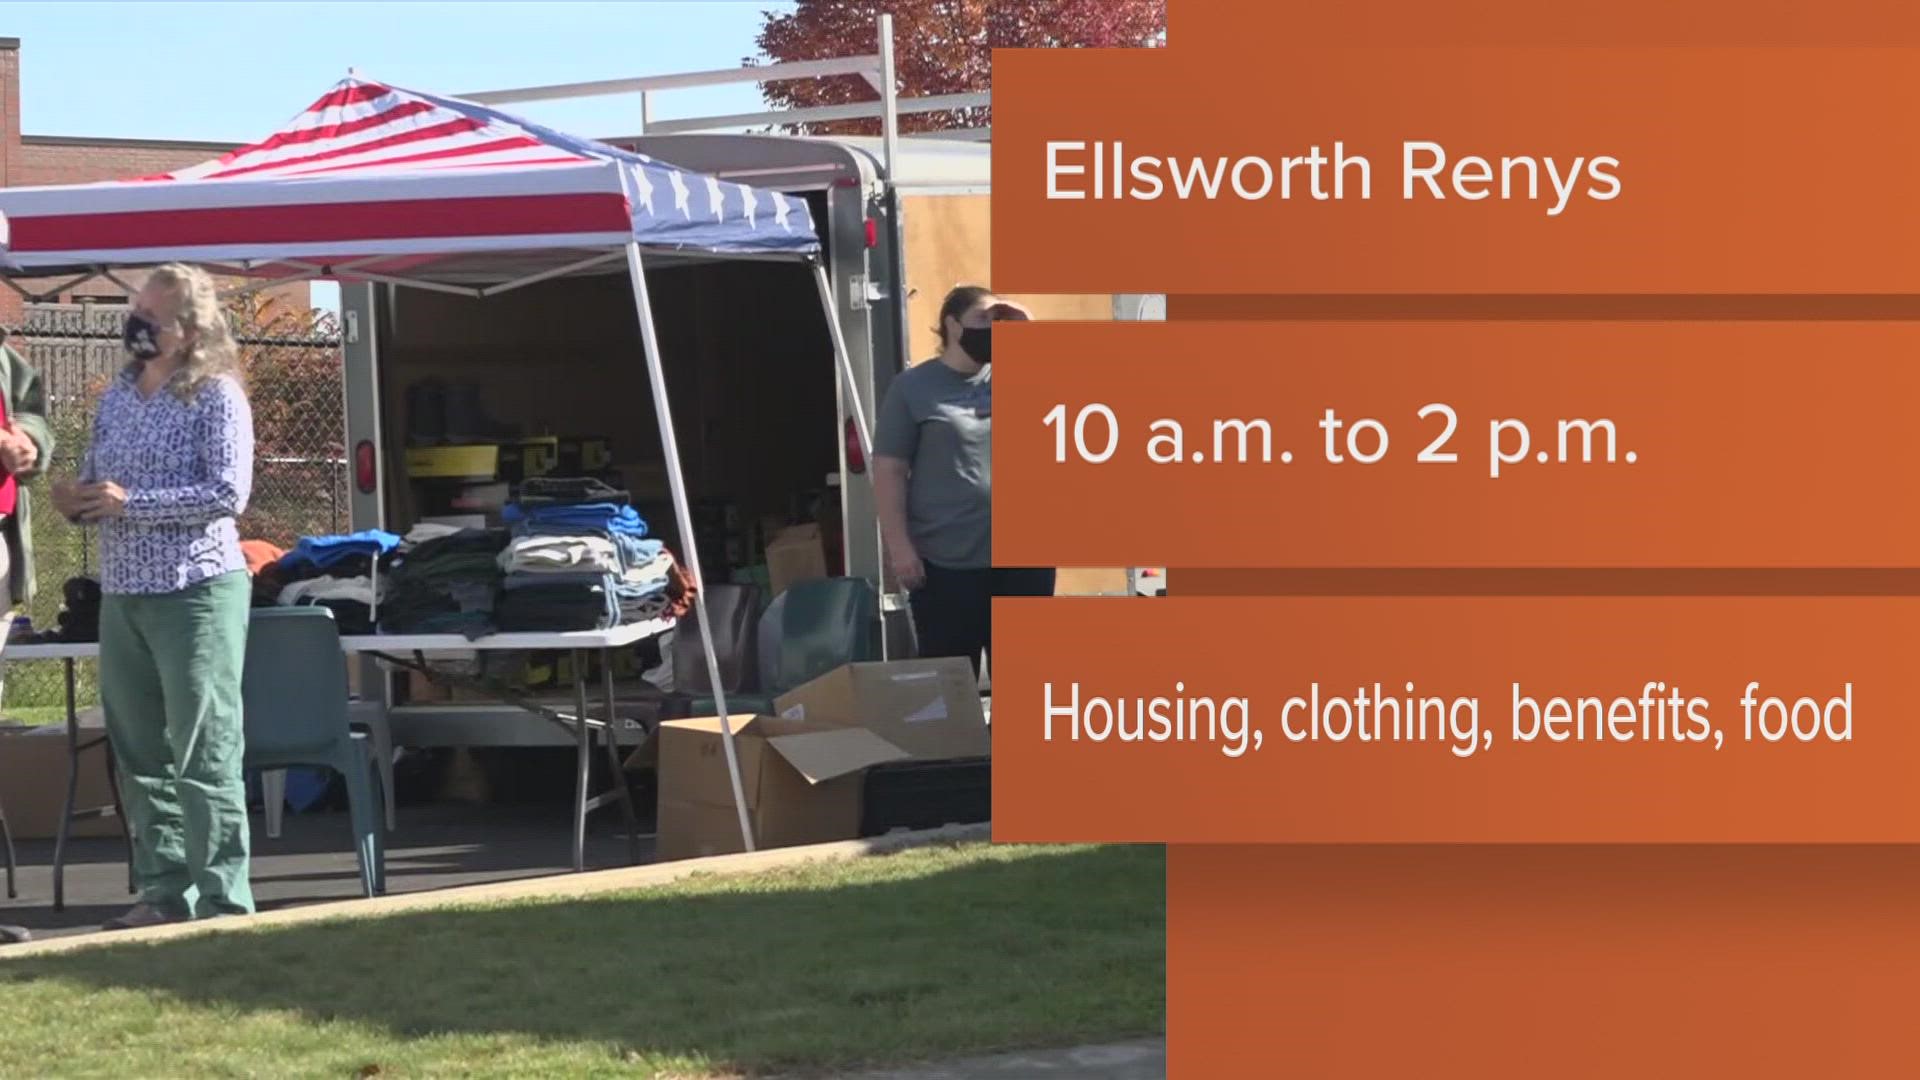 The Stand Downs provide homeless veterans access to winter clothes, non-perishable food, and housing opportunities. There are four being held in October.